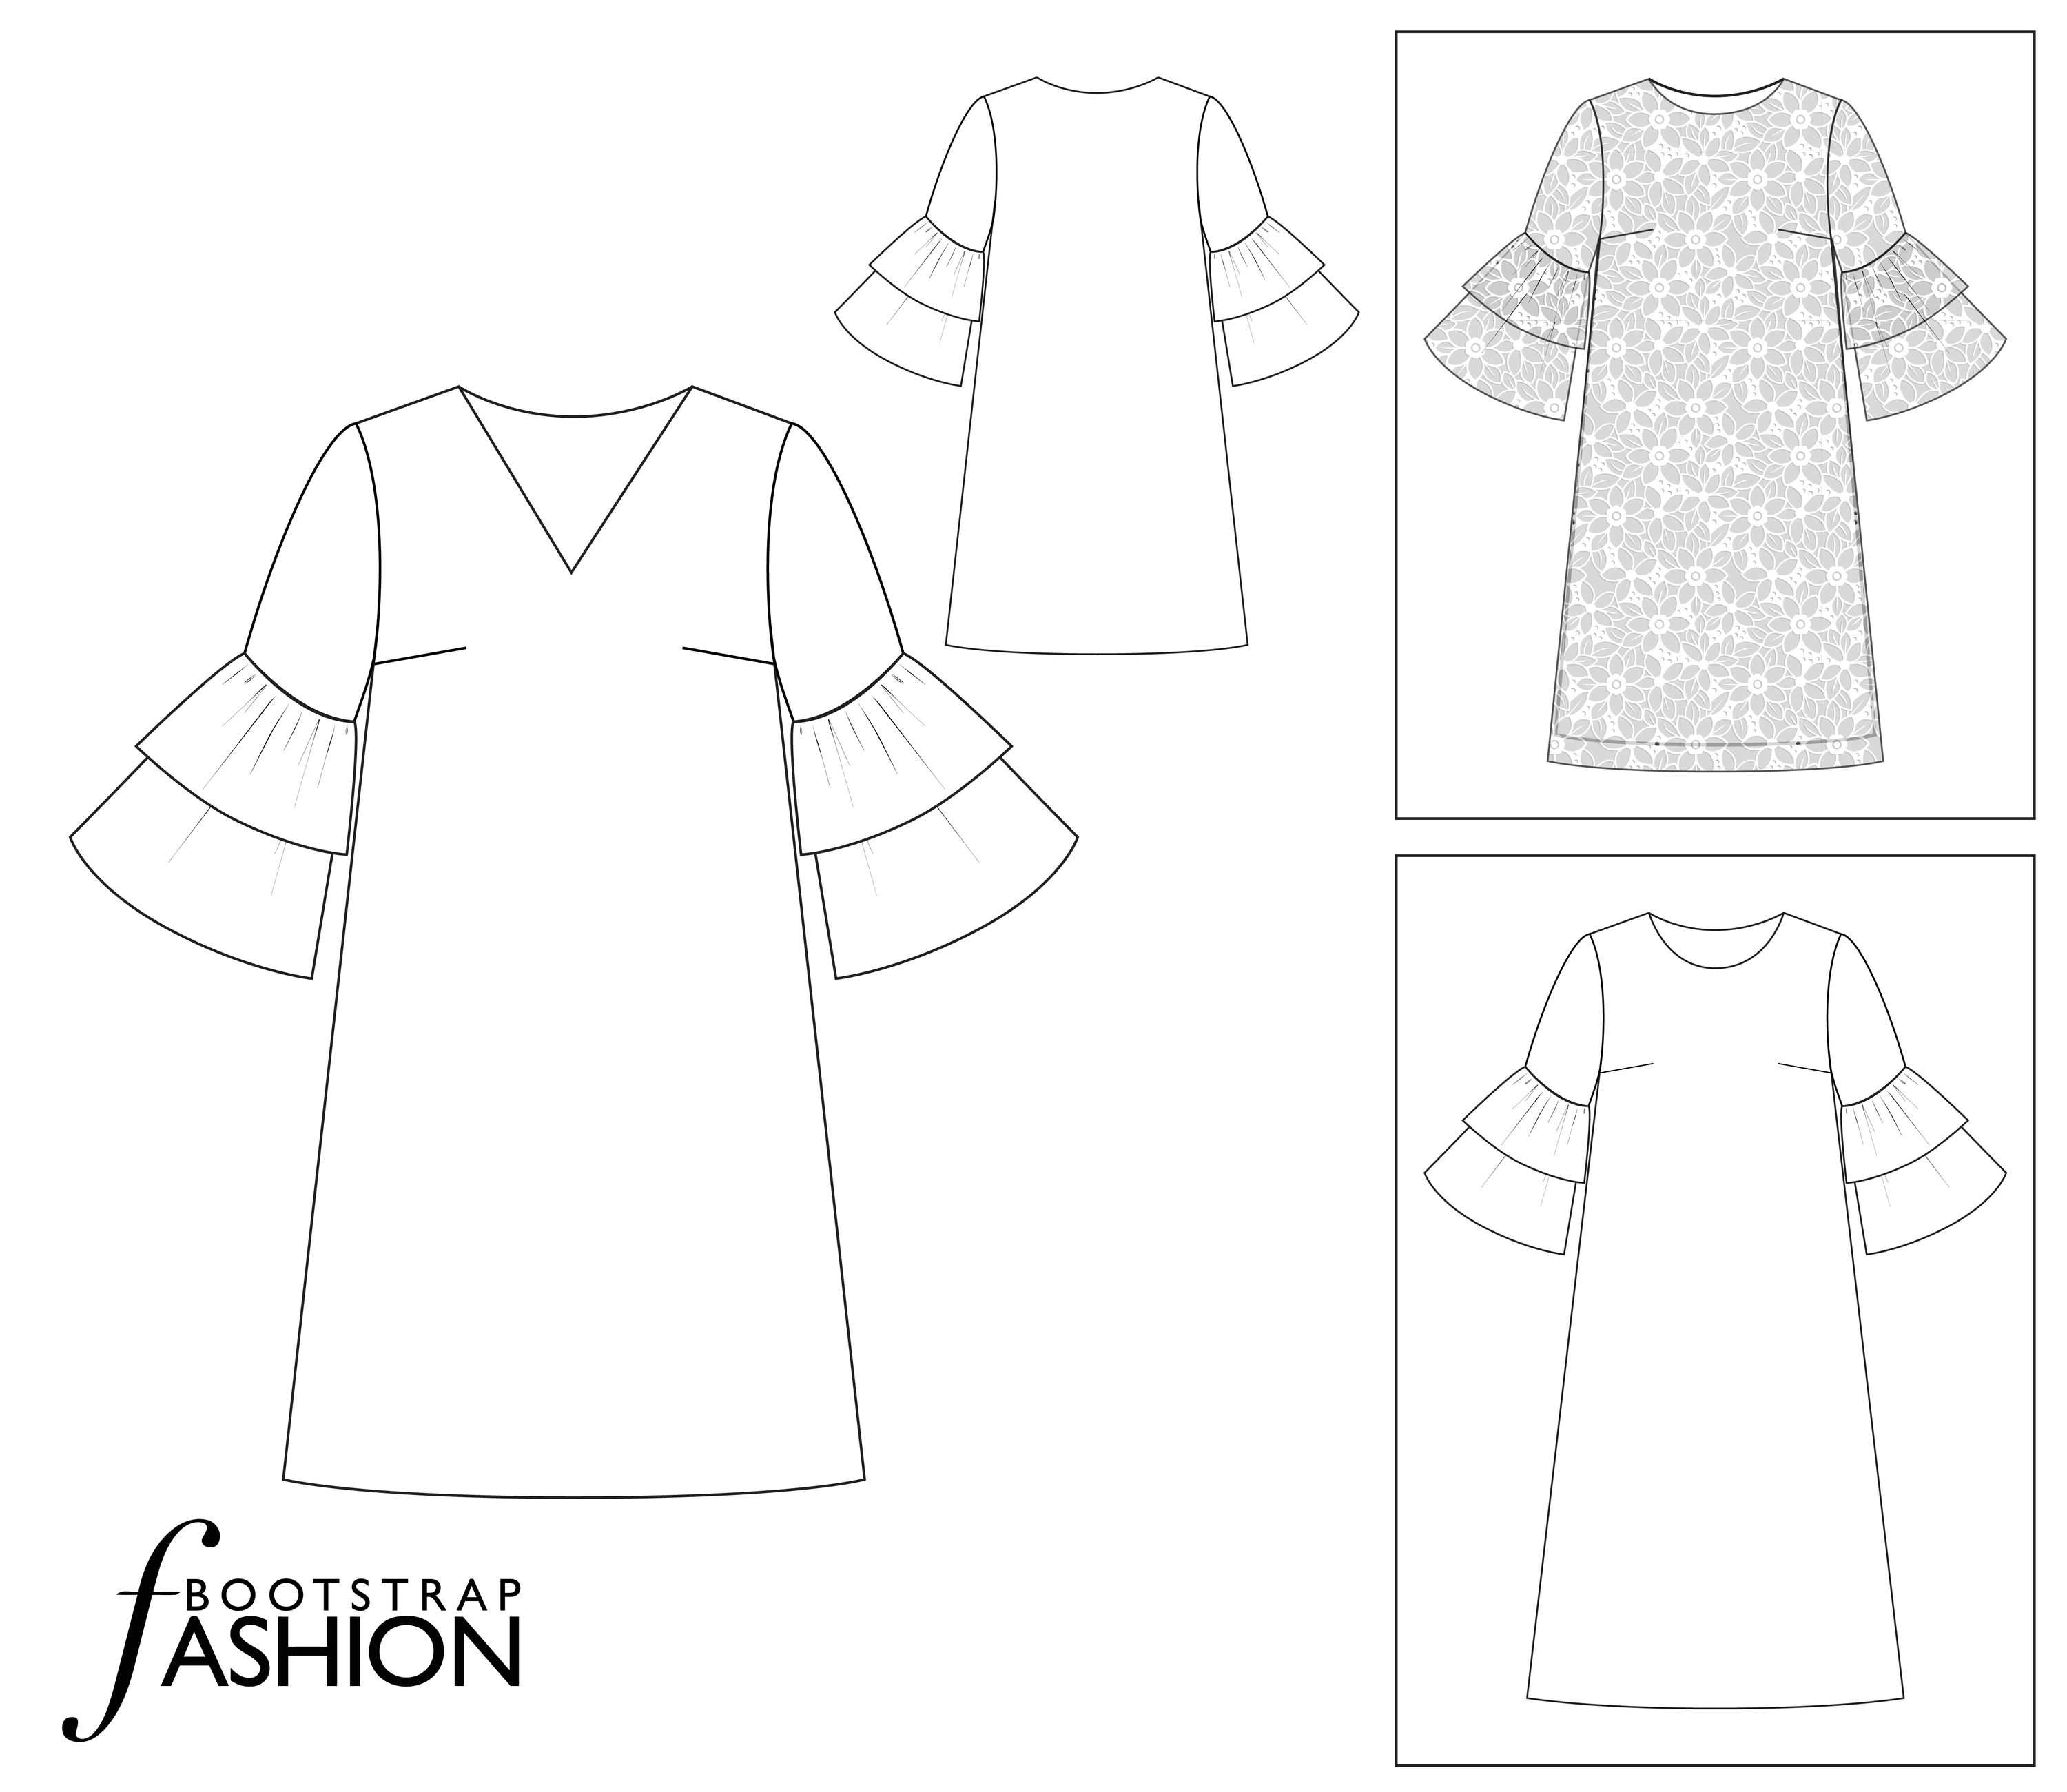 Bell Sleeve Dress Sewing Pattern. BOOTSTRAPFASHION SEWING PATTERNS ...